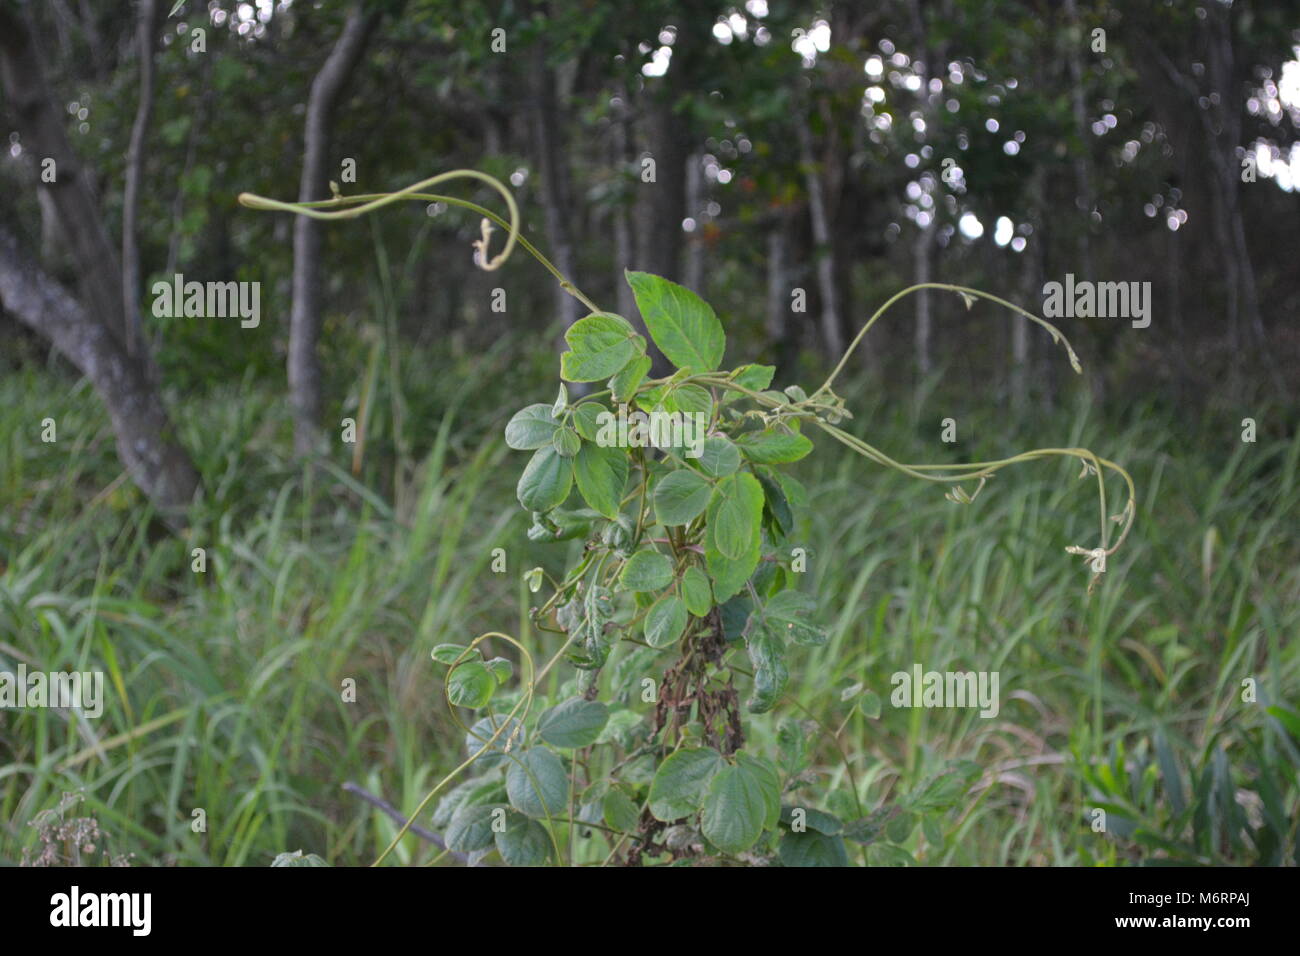 Green leaves and Twisting stems of Railroad vine or Morning Glory making a statement in an Australian Bush setting Stock Photo